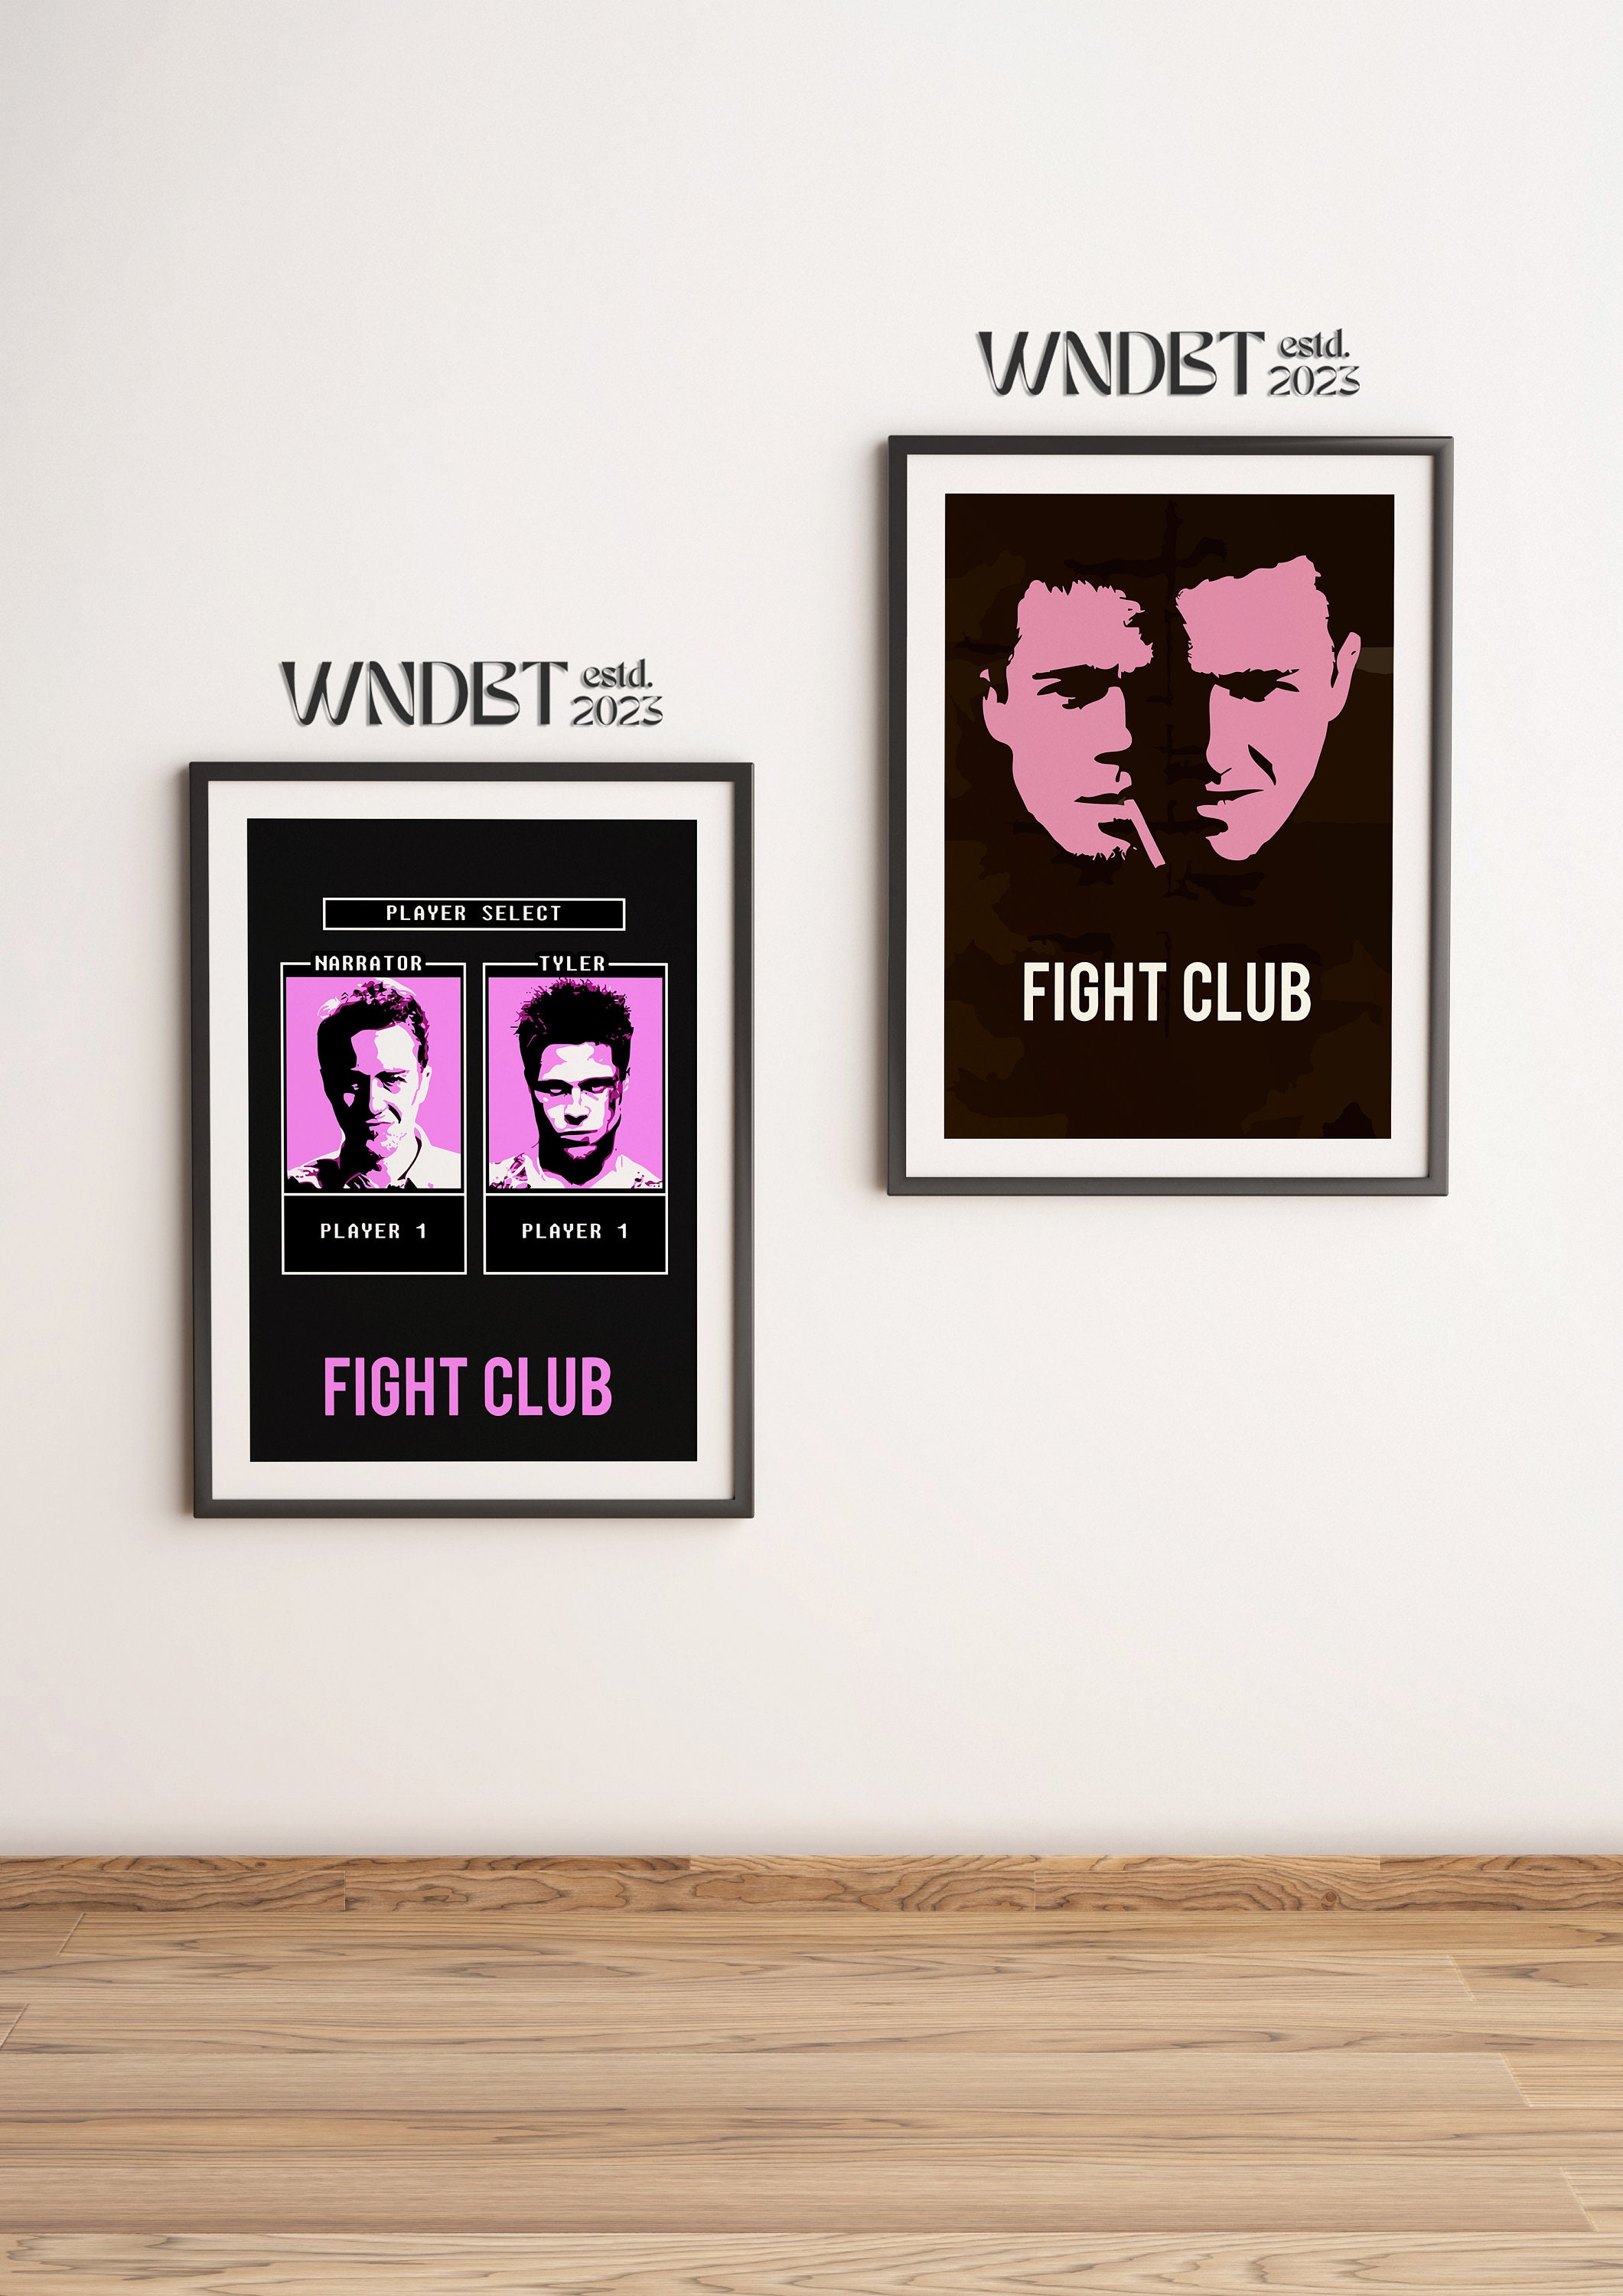 Discover PRINTABLE FULL HD Fight Club Poster, 600 Dpi Resolution, Movie Poster, Hand-Drawn Style, Room Decor, Home Decor, Digital Poster, Brad Pitt